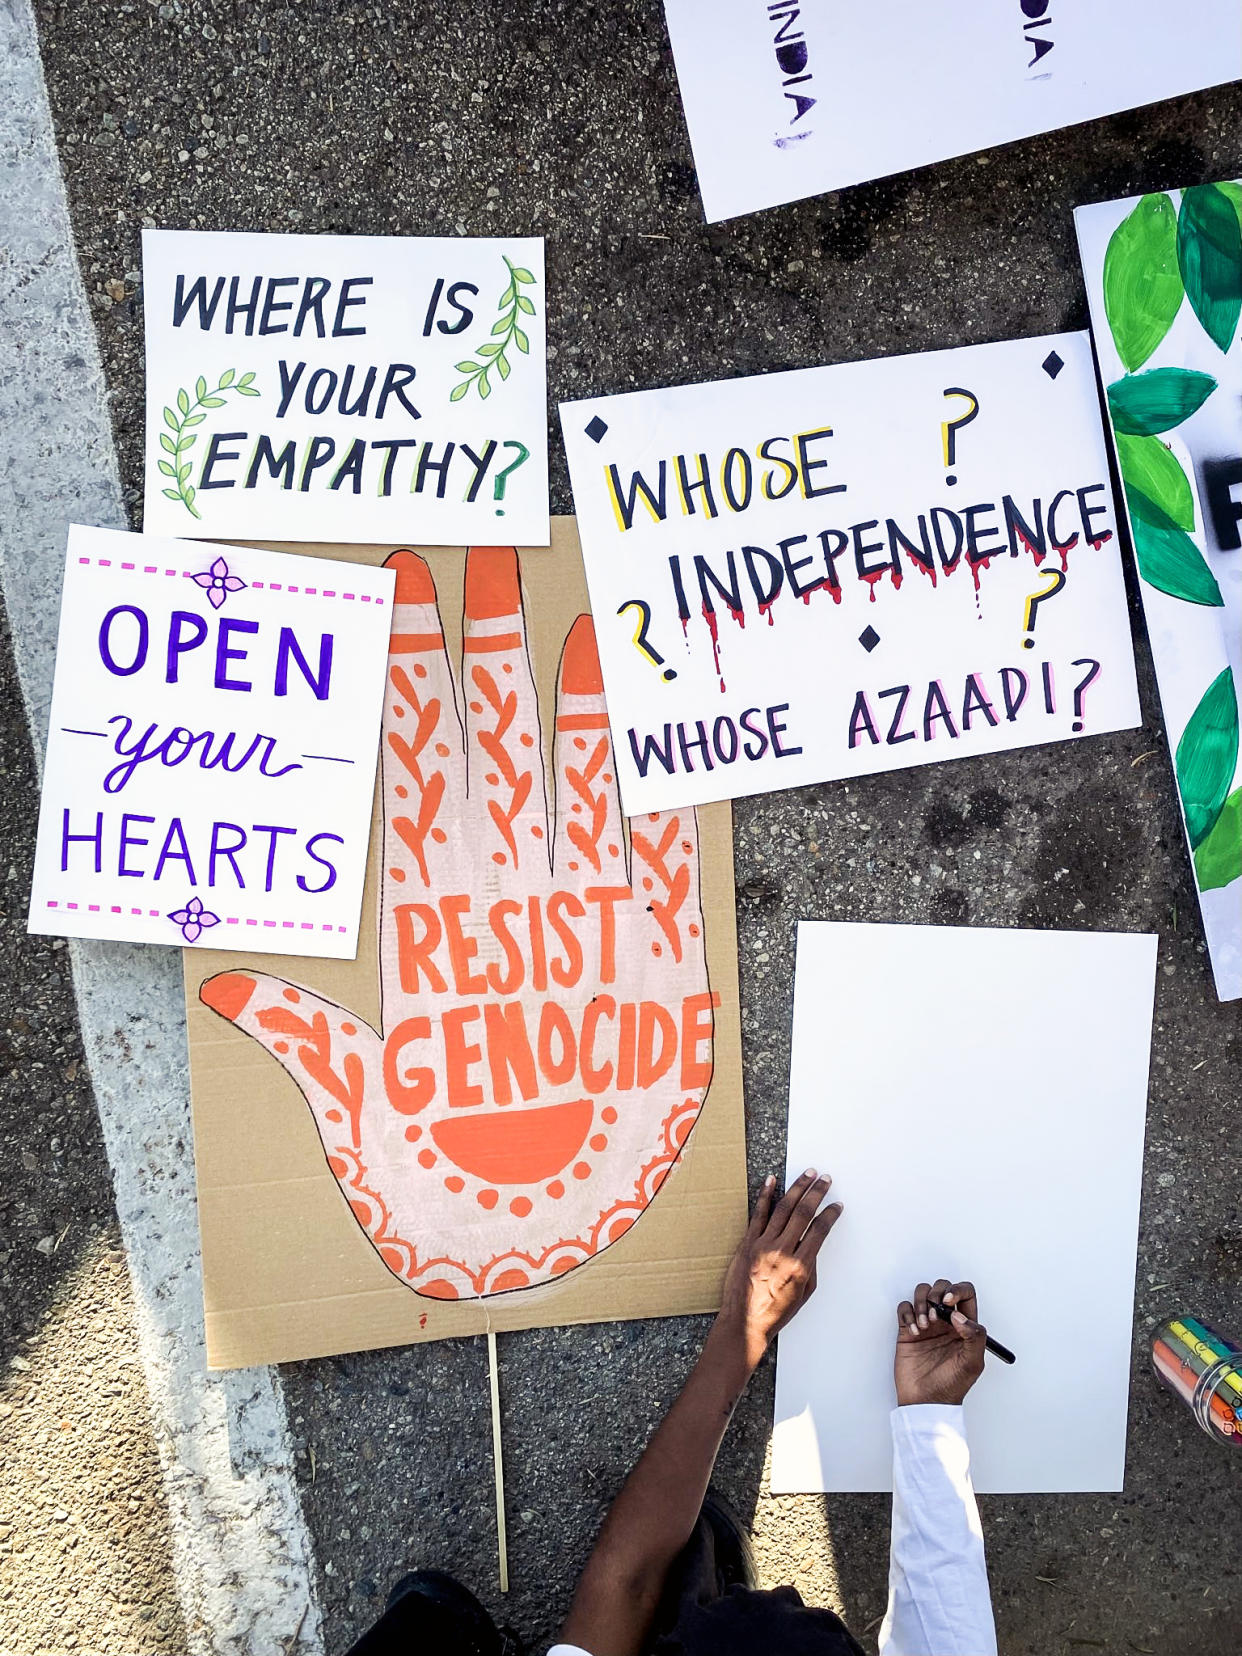 Signs brought by protestors at the Indian Independence Day parade in Anaheim, Cali on Sunday. (Shanelle Gulabi)